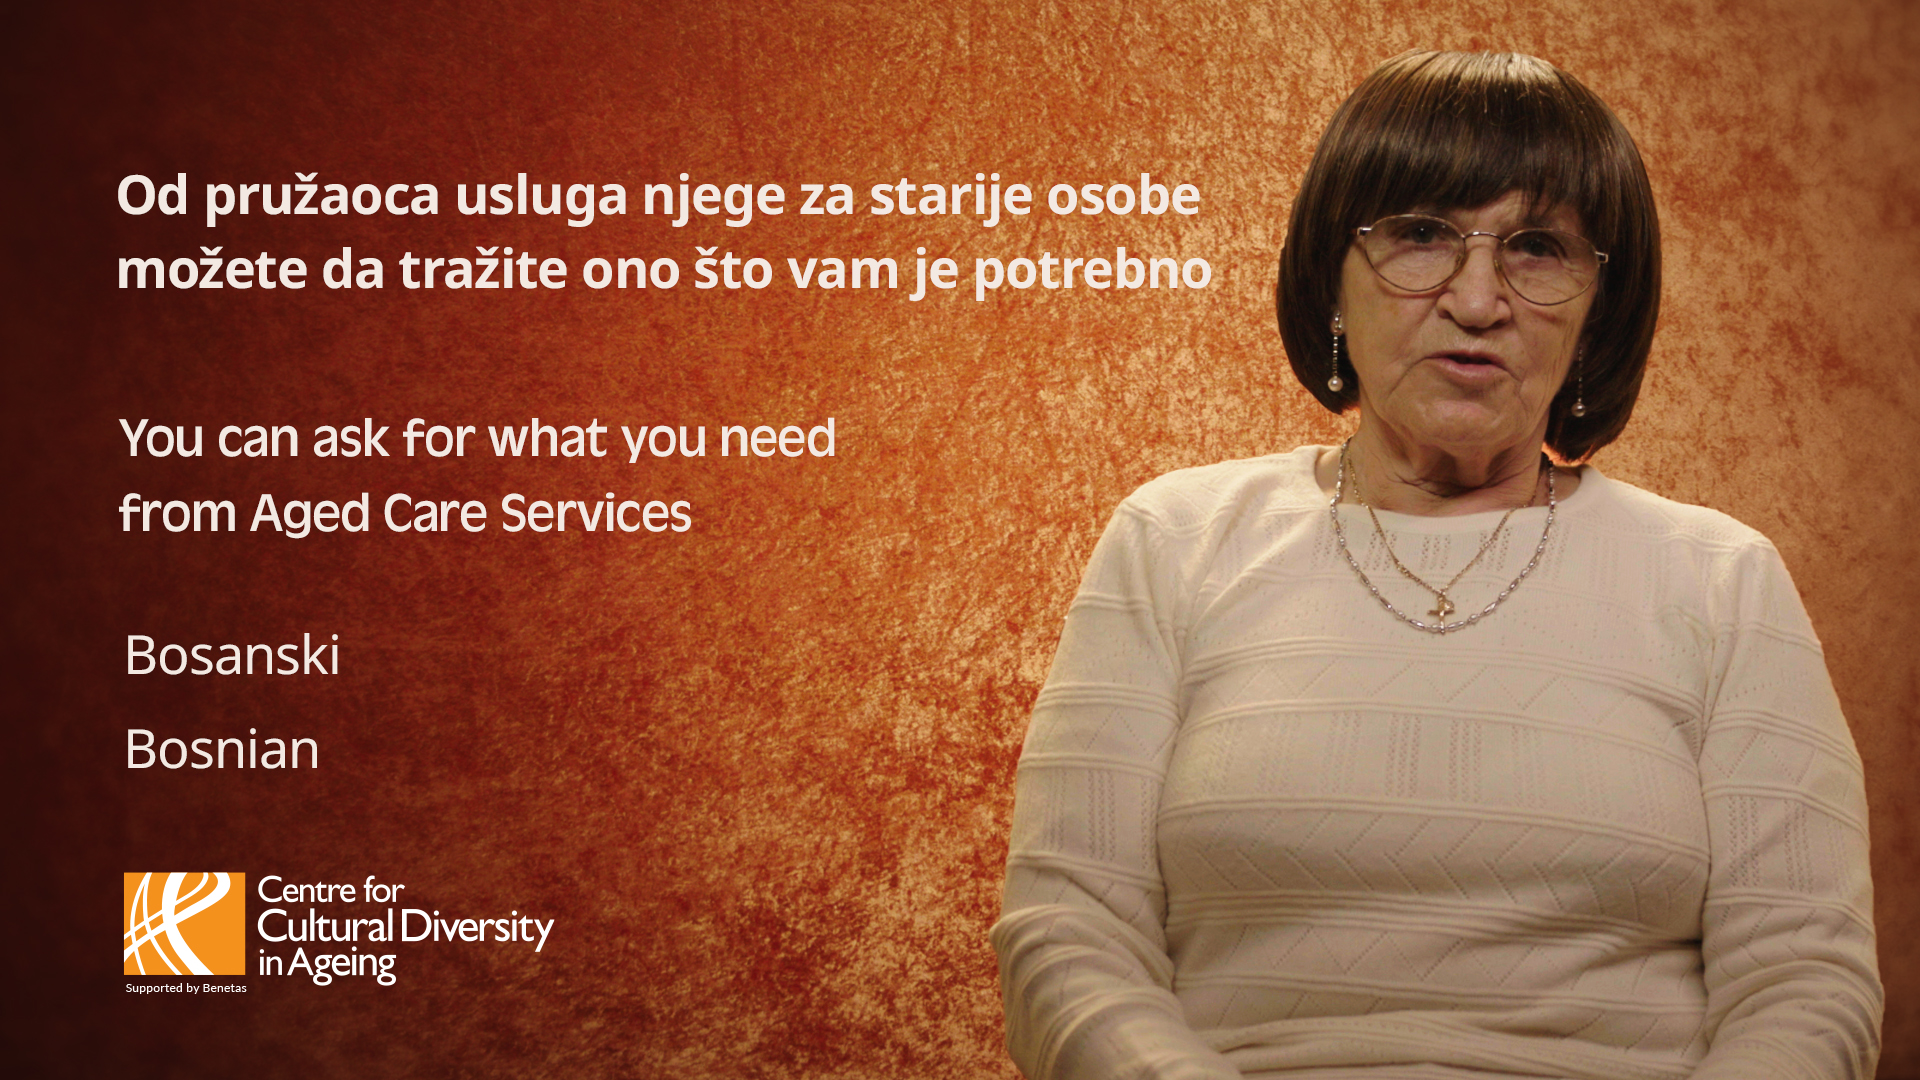 You can ask for what you need from aged care services bosnian thumbnail